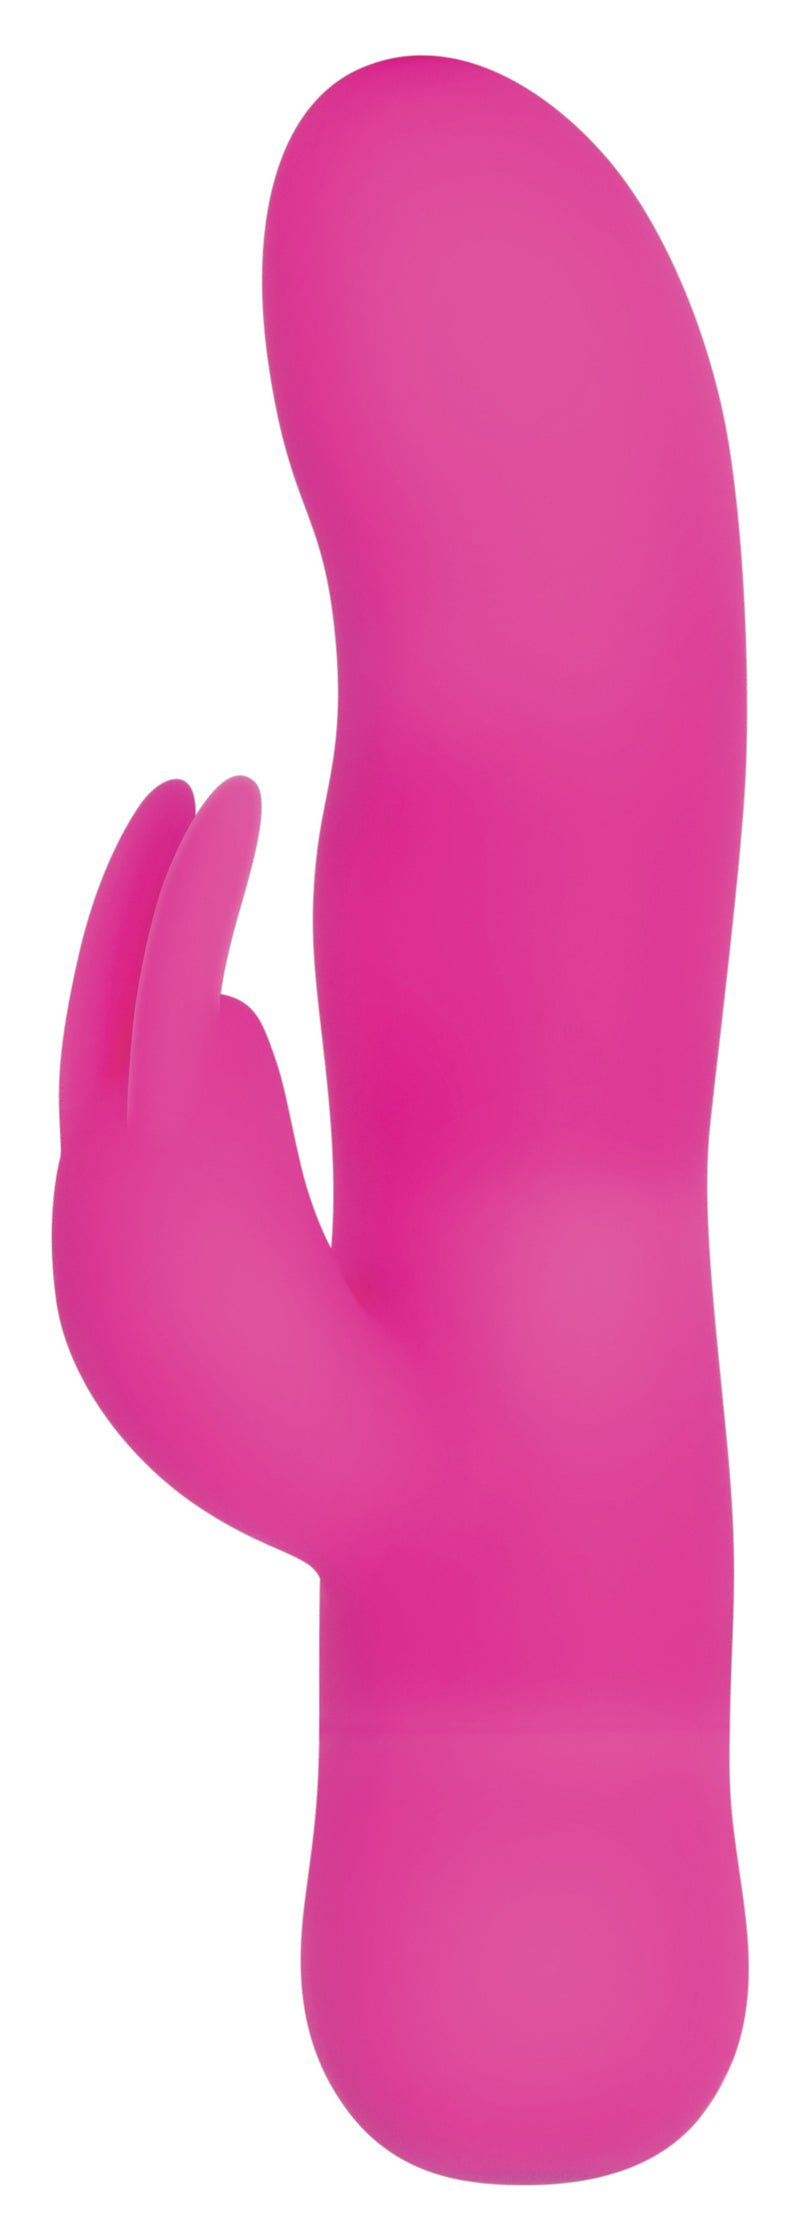 Silky Smooth Silicone Rabbit Vibrator with 10 Powerful Motor Speeds and Waterproof Design for Ultimate Pleasure Ride!